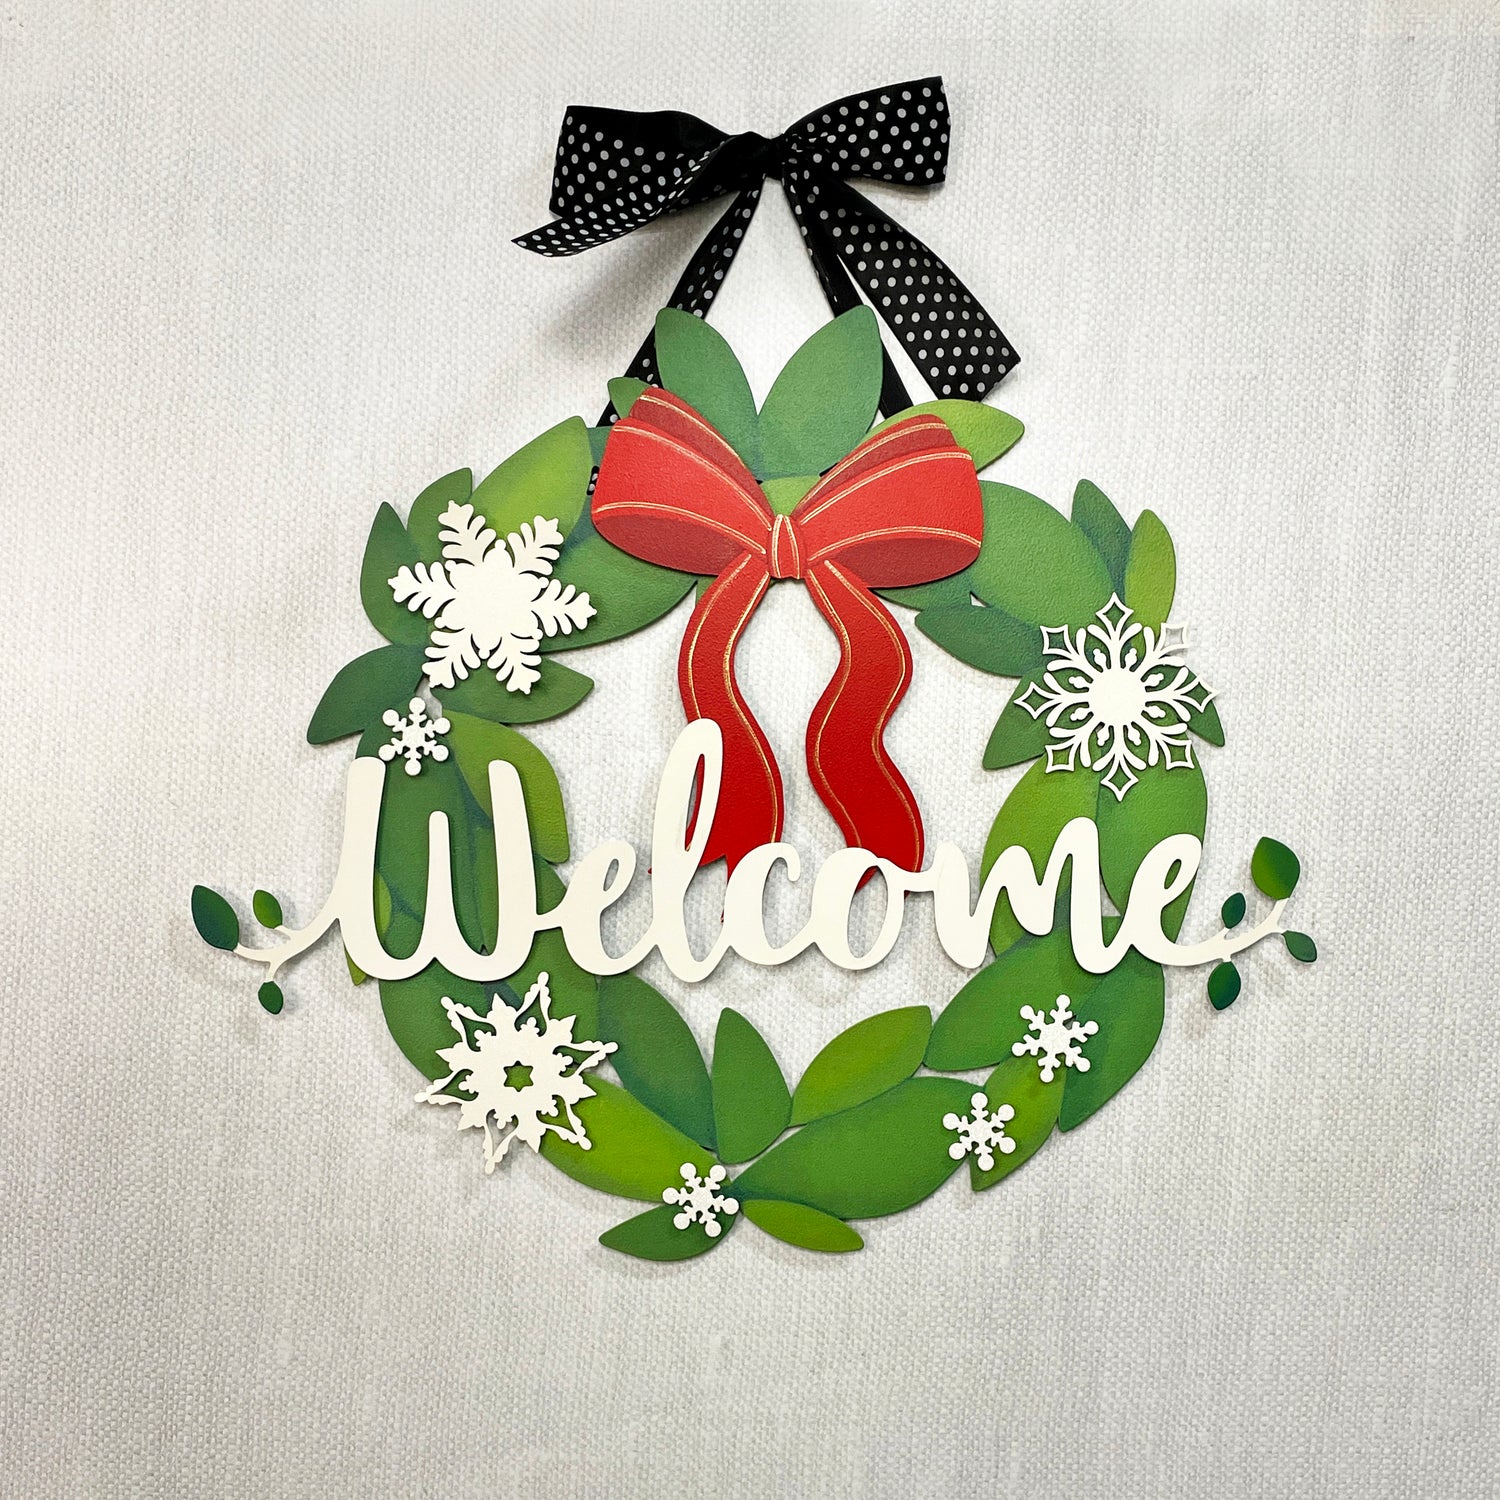 &quot;Welcome&quot; Magnetic Word w/ Greenery - 18&quot; White